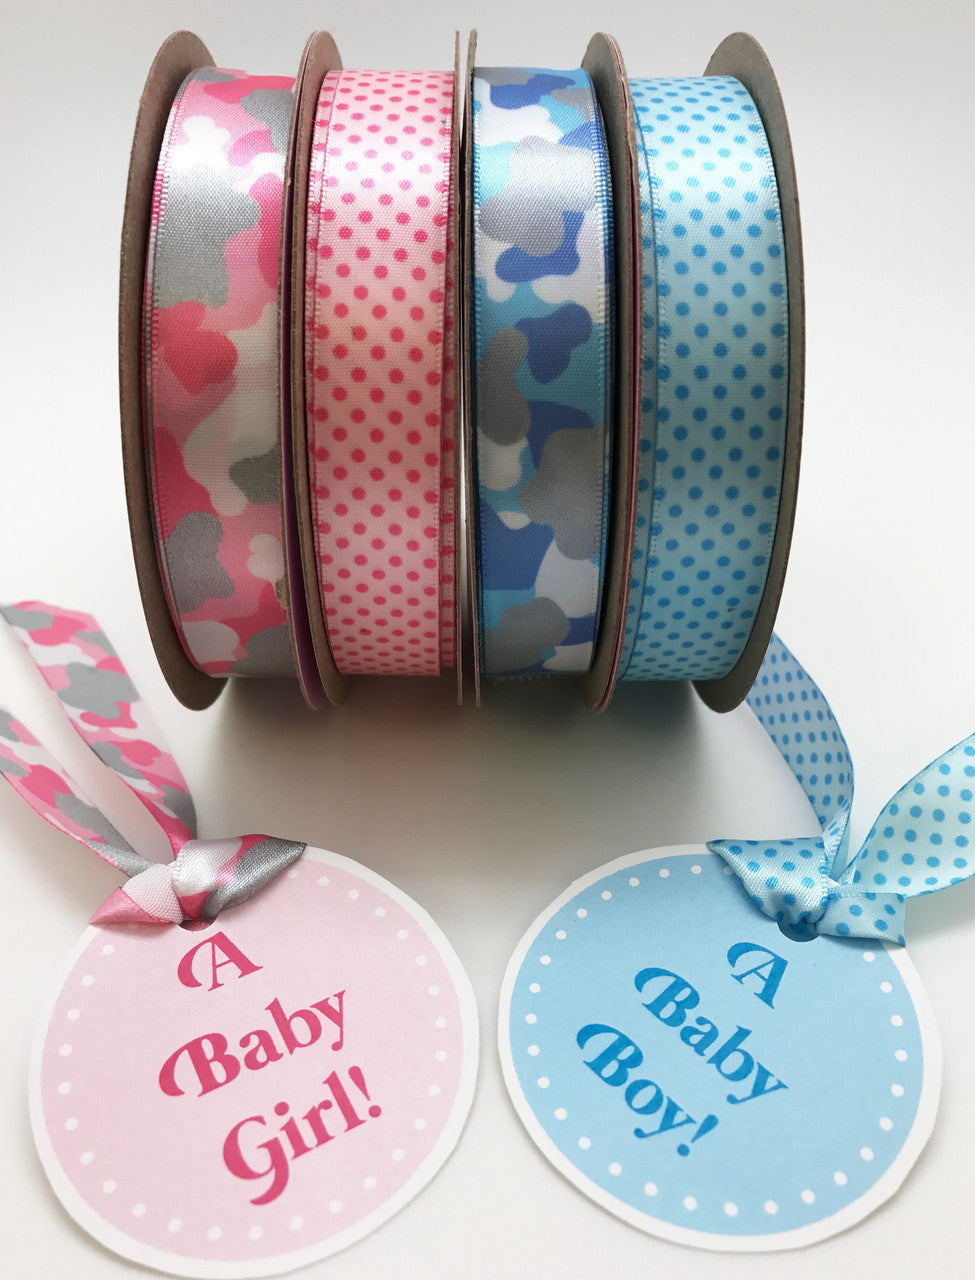 These pink pin dots can be combined with our pink and gray camouflage ribbon for a fun baby girl shower! Mixing and matching can be a great way to add some variety to the decor!